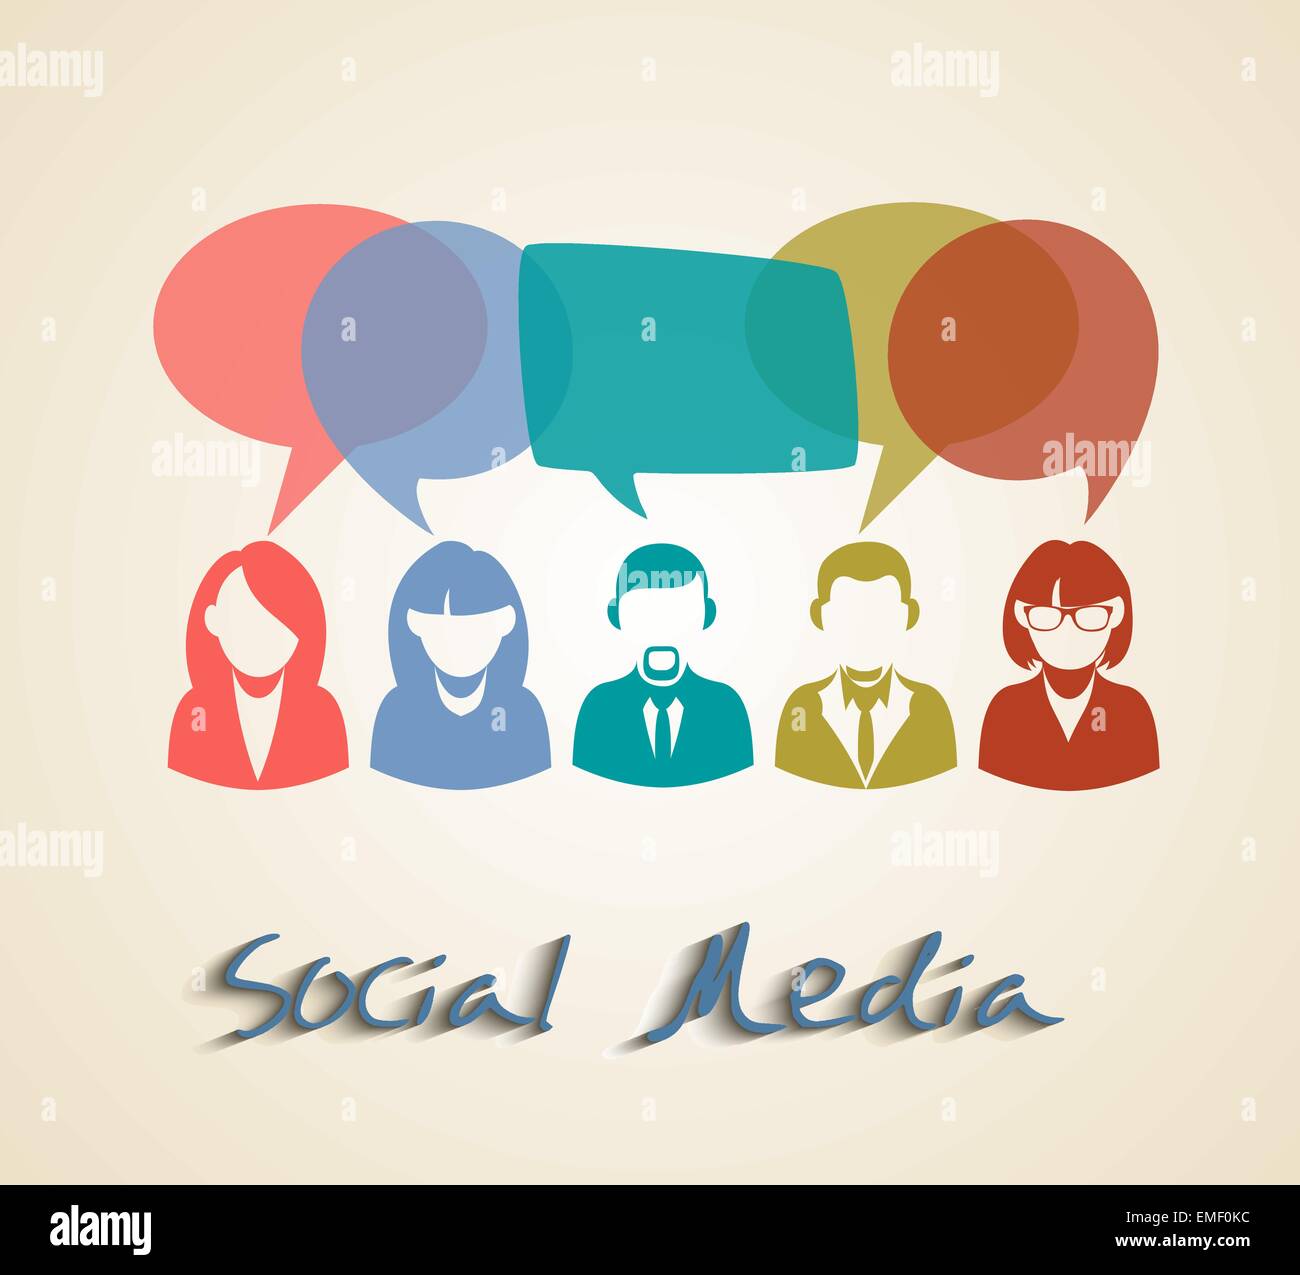 Social media chat people group Stock Vector